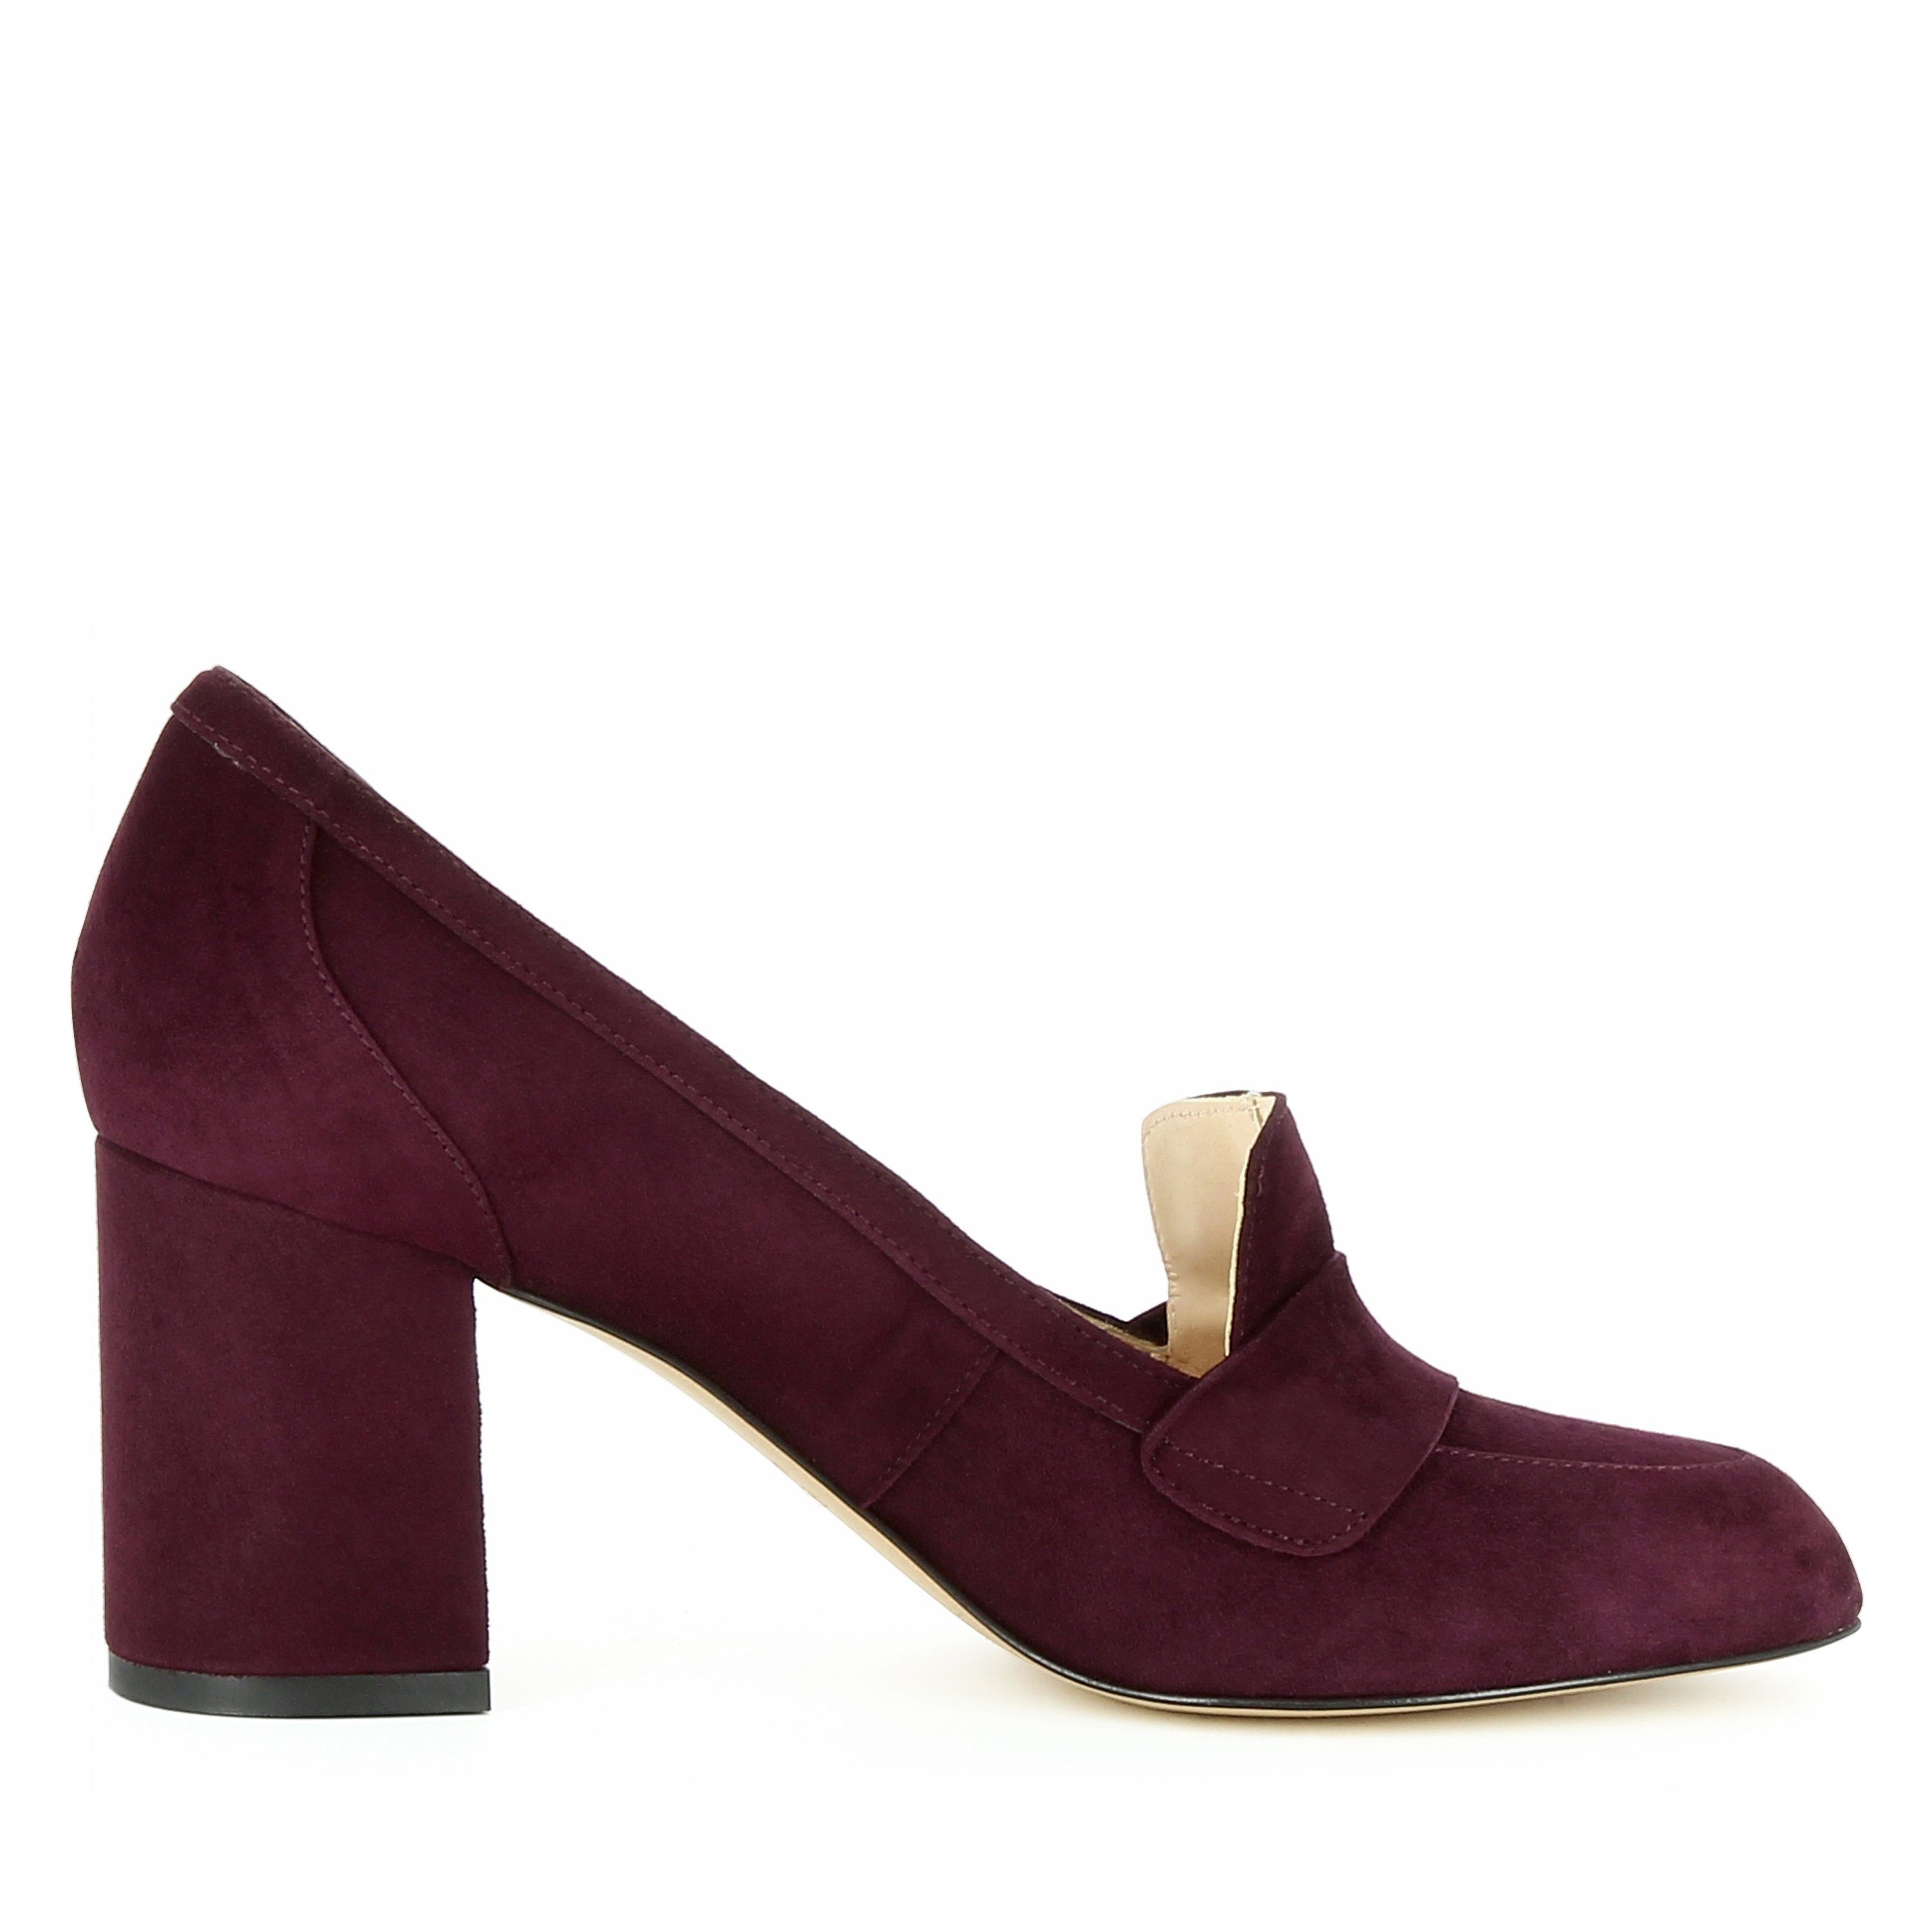 NELLY bordeaux Evita Pumps in Italy Handmade